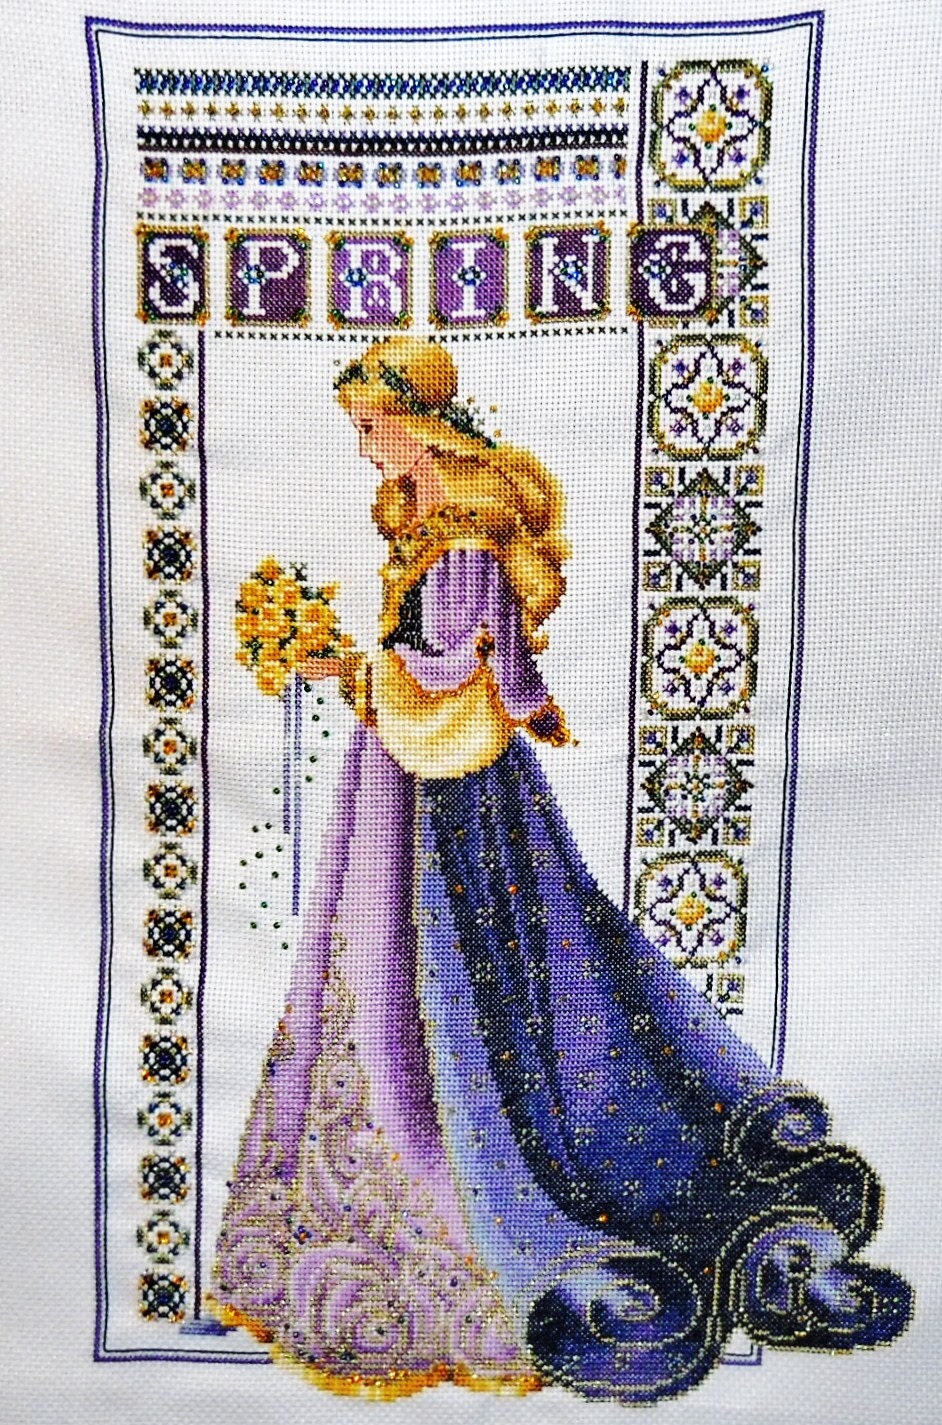 CELTIC SPRING Lavender & Lace Completed Cross Stitch Beaded